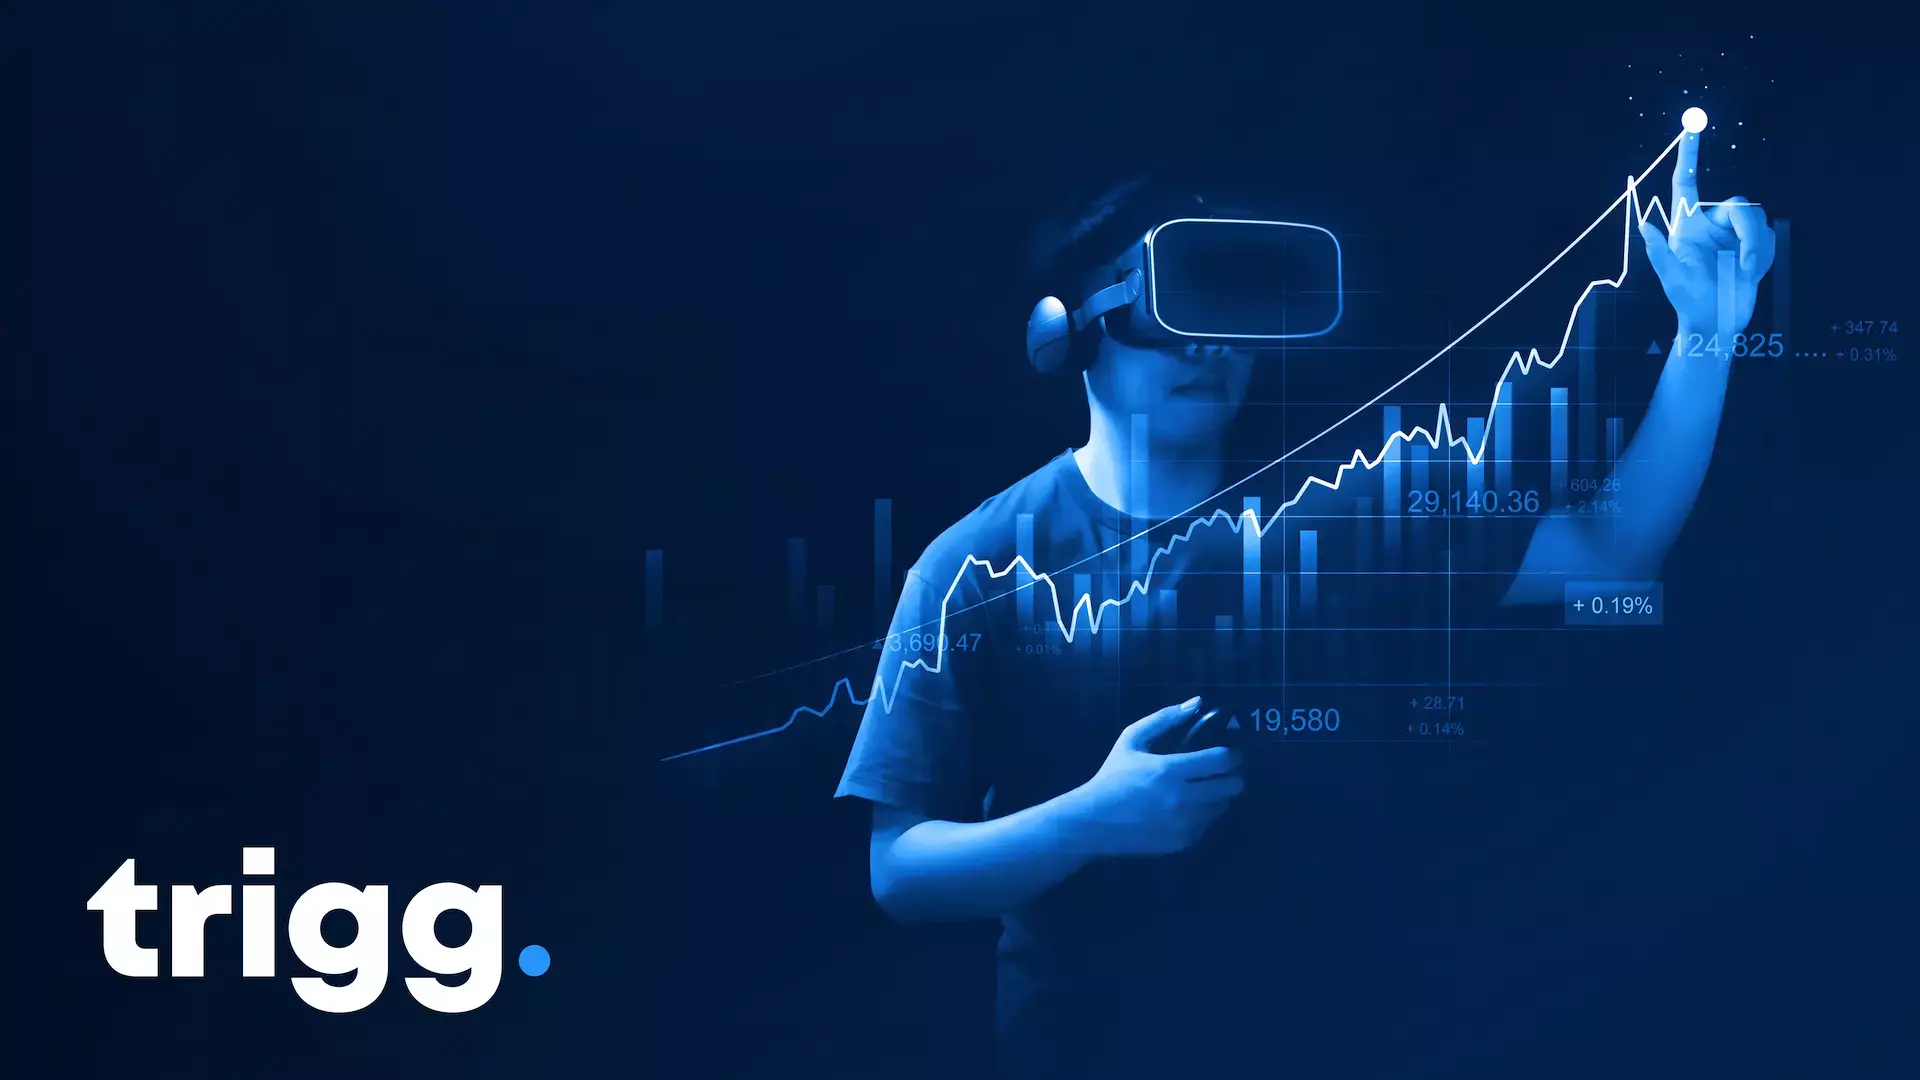 The Trigg logo, next to a person pointing at a graph with a virtual reality headset on